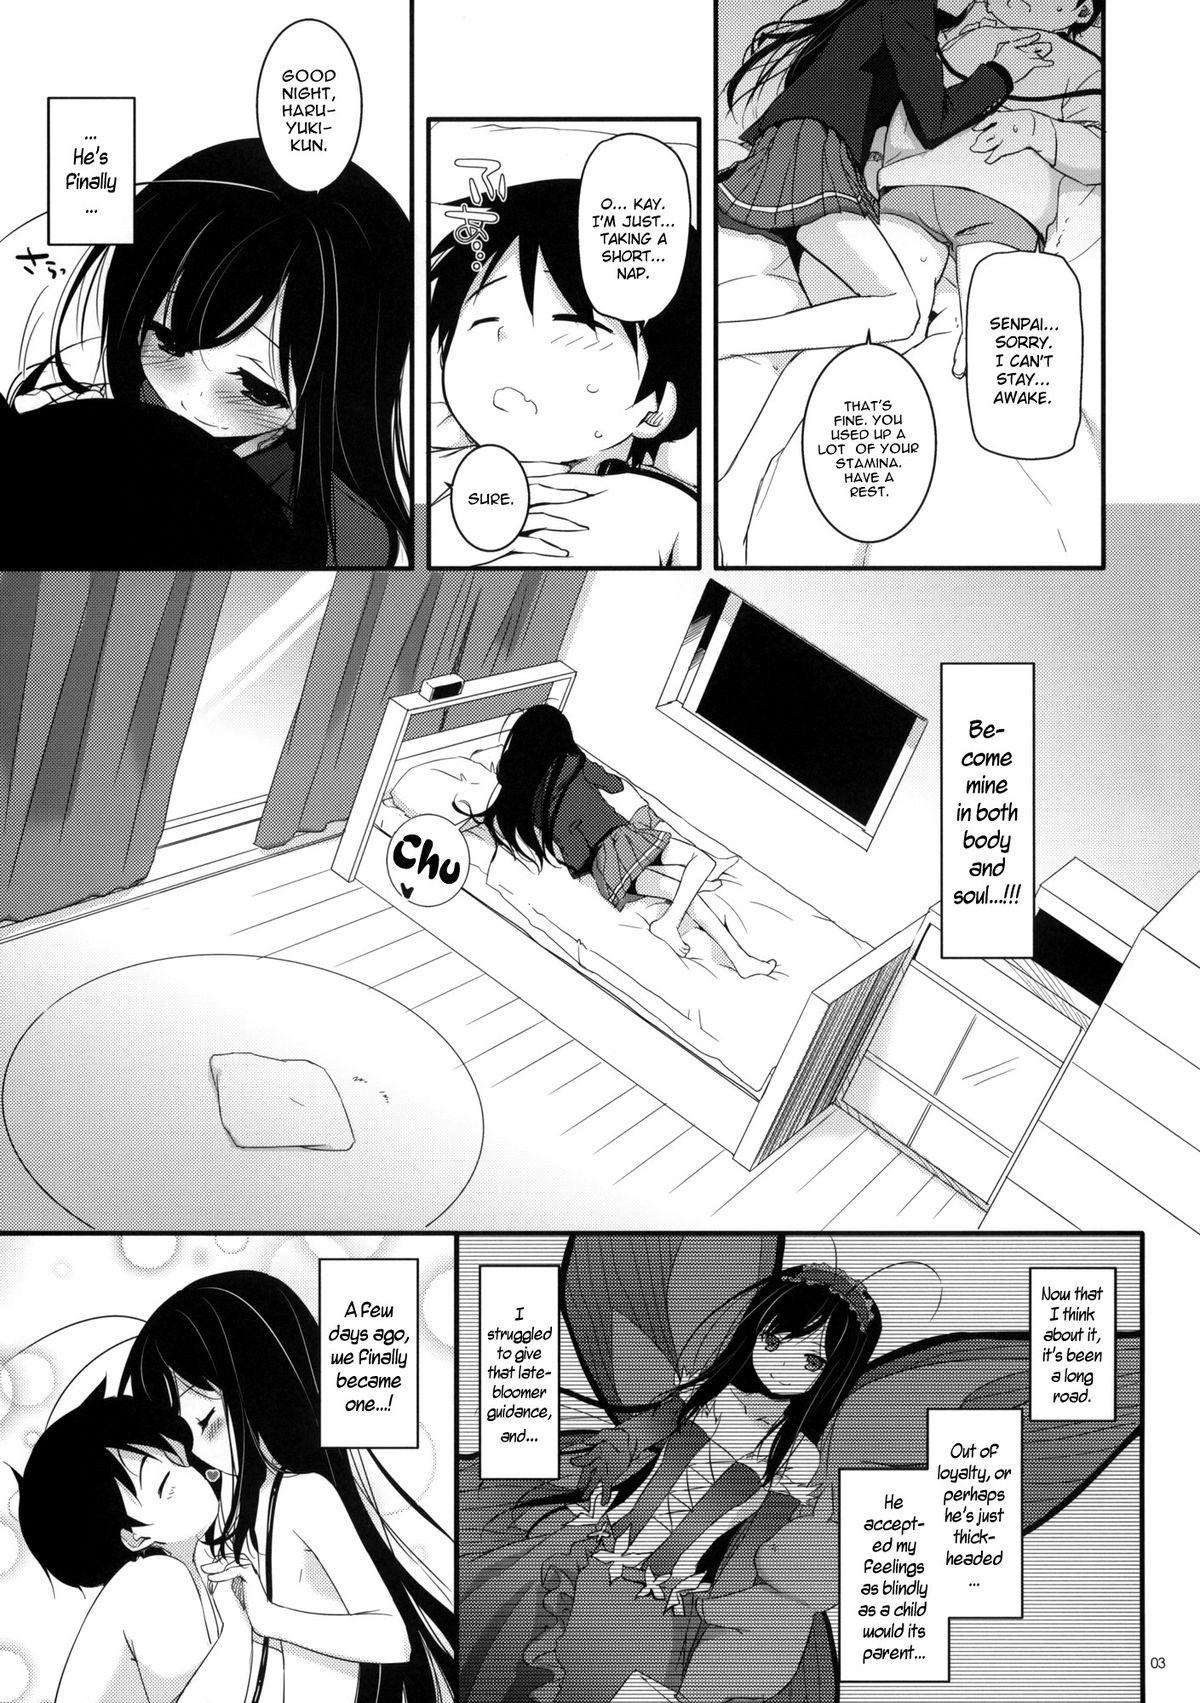 Best D.L. action 68 - Accel world Gay Money - Page 2